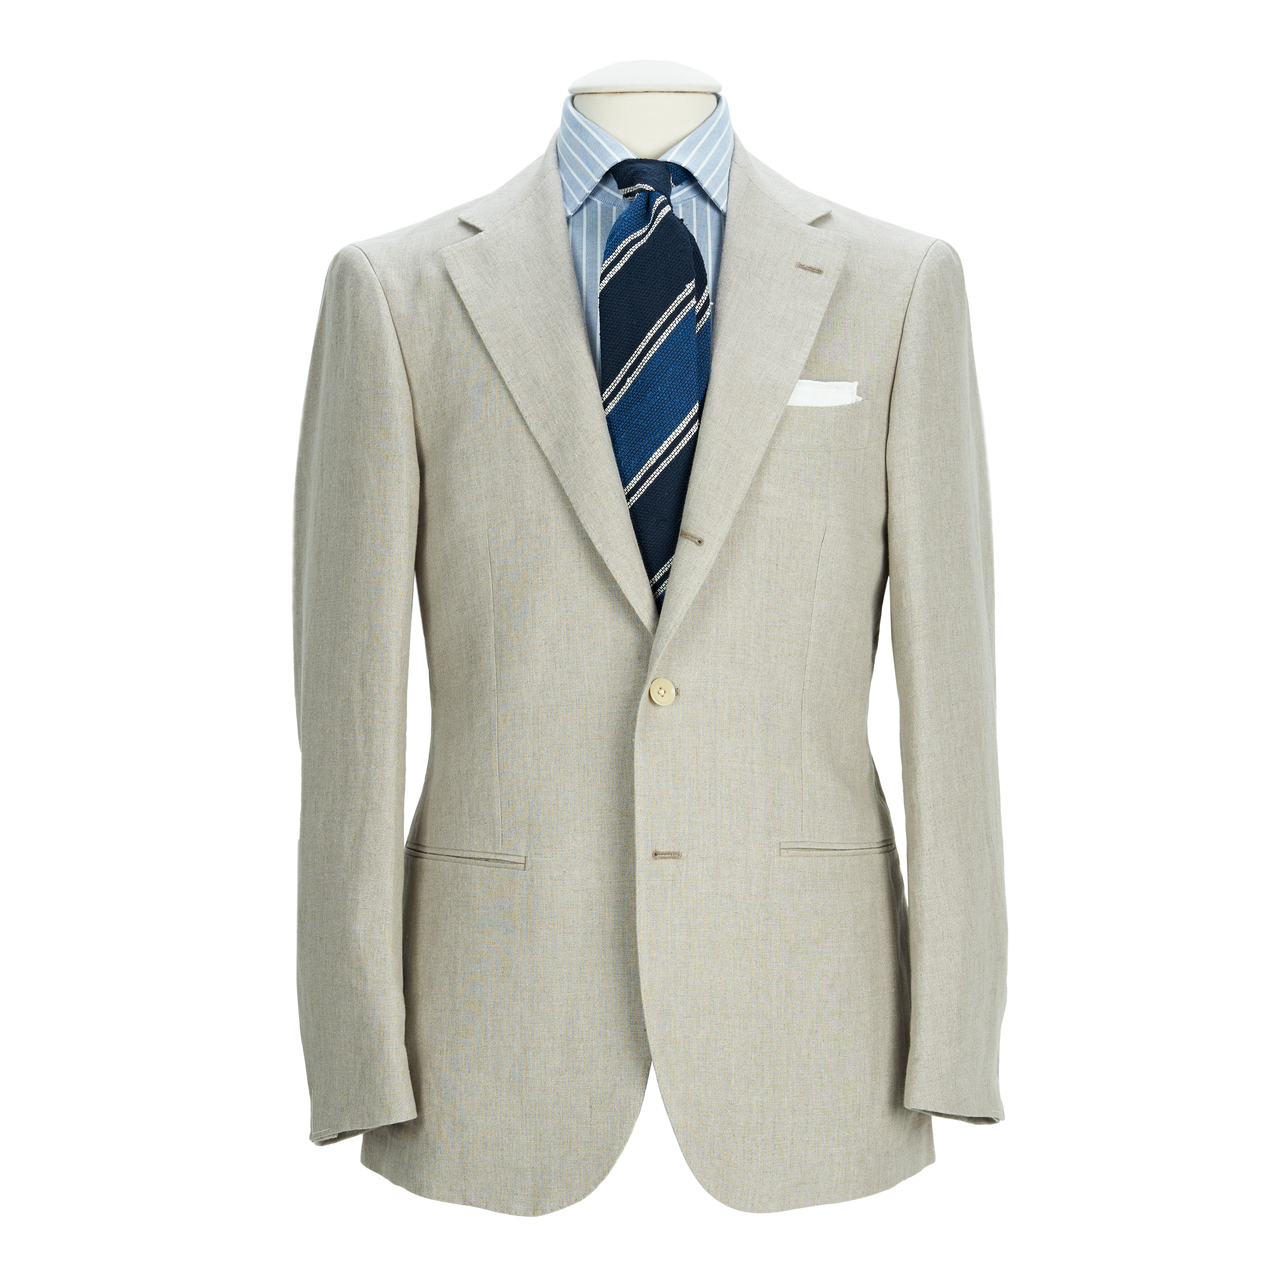 Ring Jacket Suit 269E-S172 in Oatmeal Linen